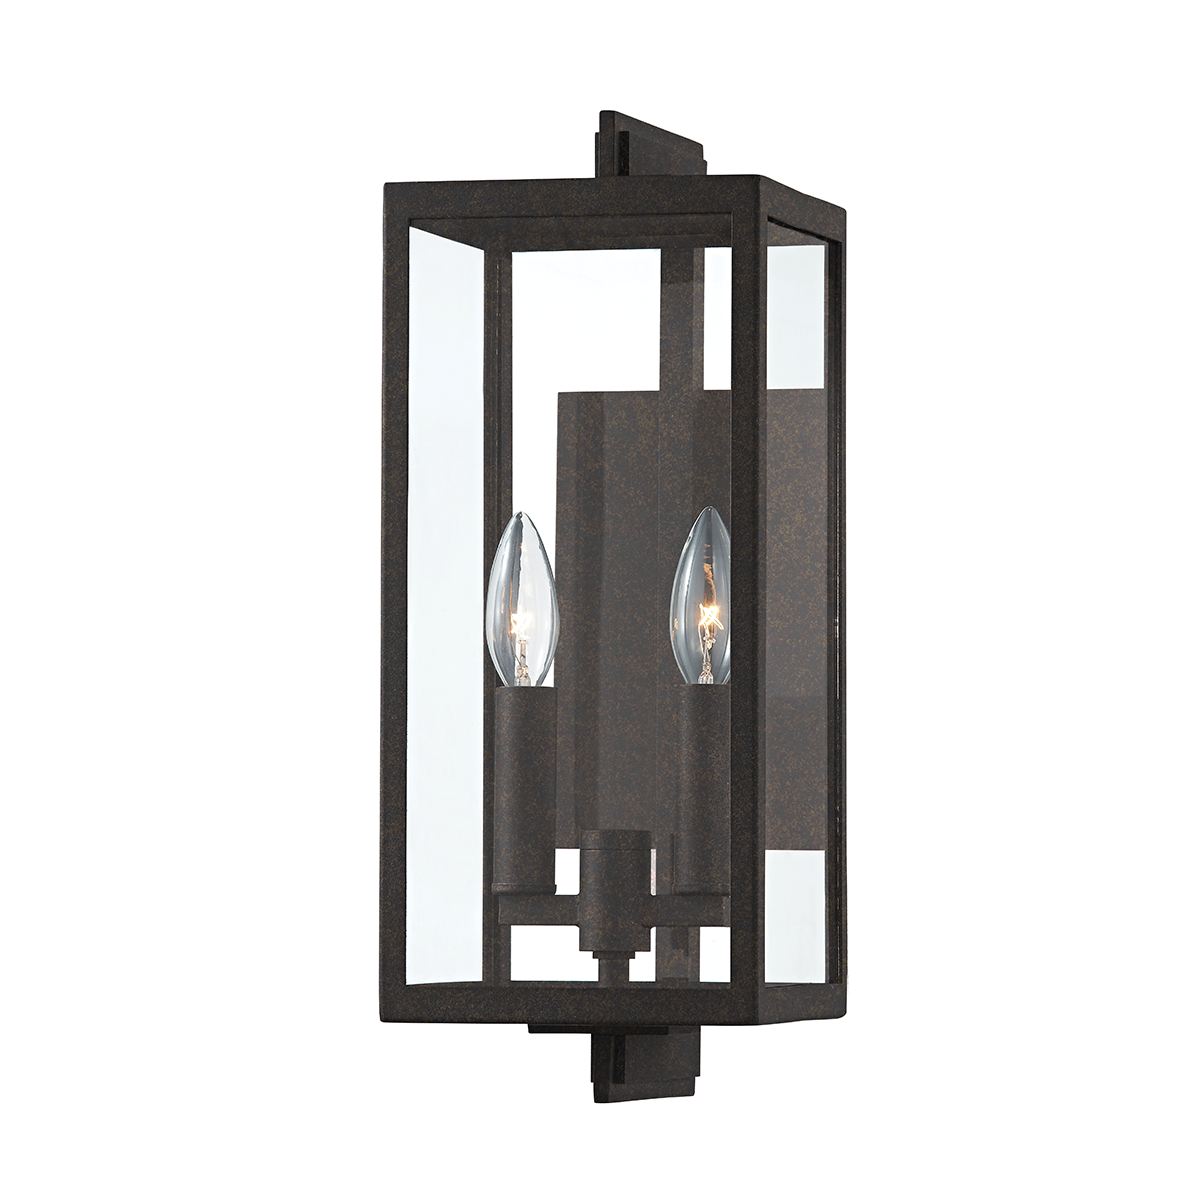 Troy NICO 2 LIGHT EXTERIOR WALL SCONCE B5512 Outdoor l Wall Troy Lighting FRENCH IRON  